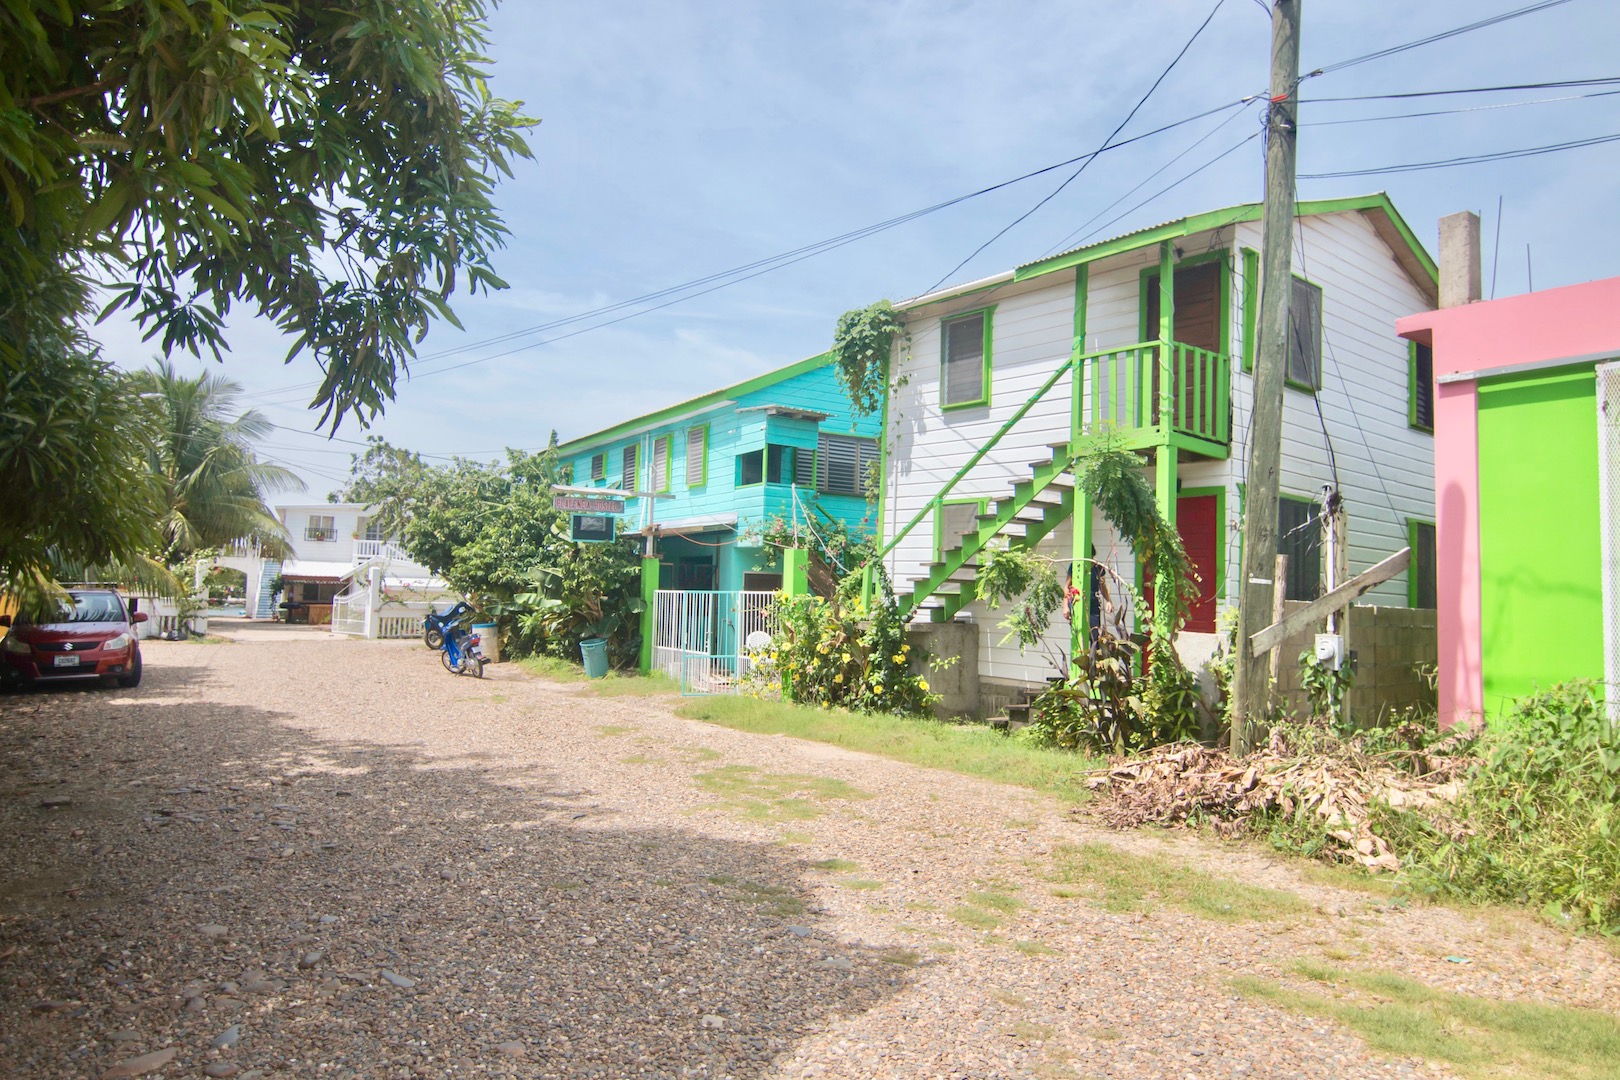 Belize Residential Income Property for Sale